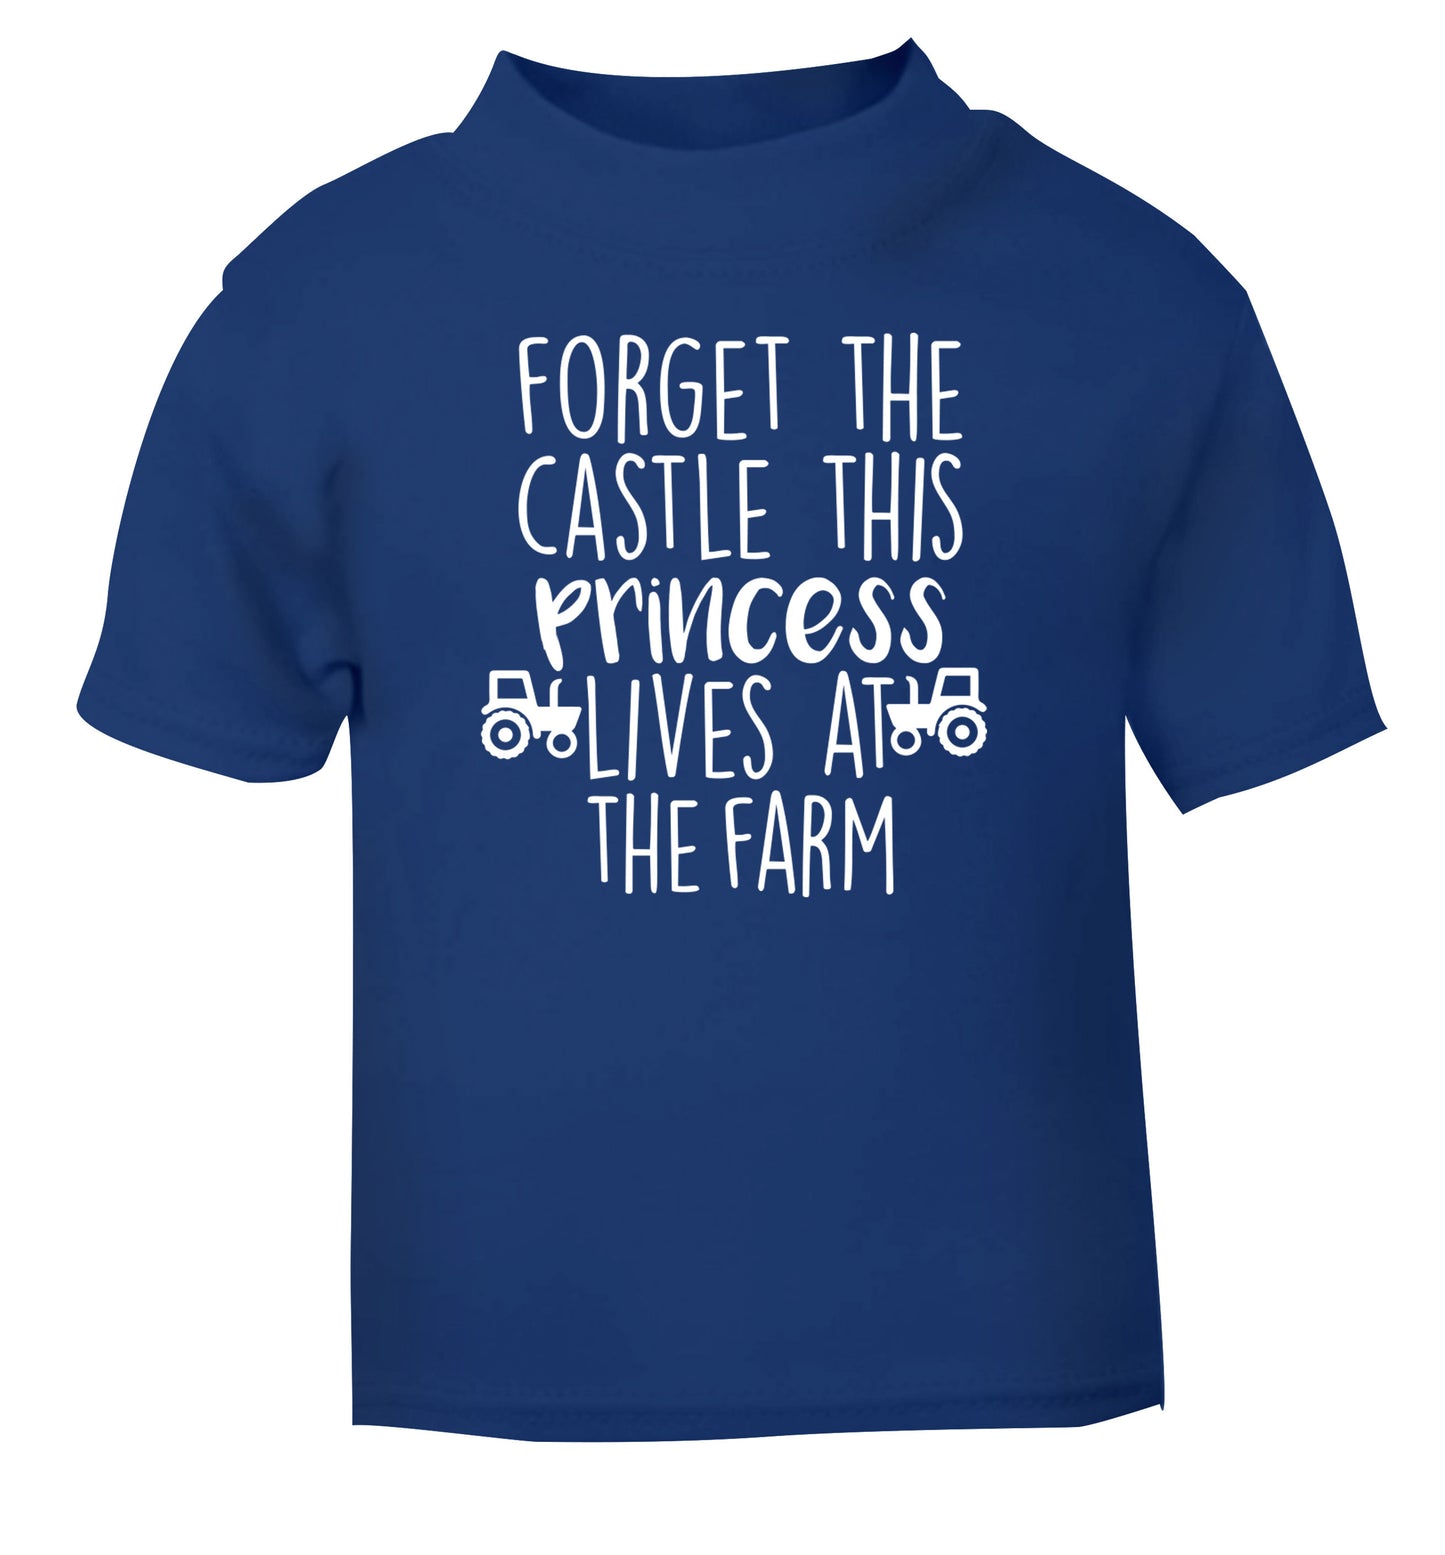 Forget the castle this princess lives at the farm blue Baby Toddler Tshirt 2 Years